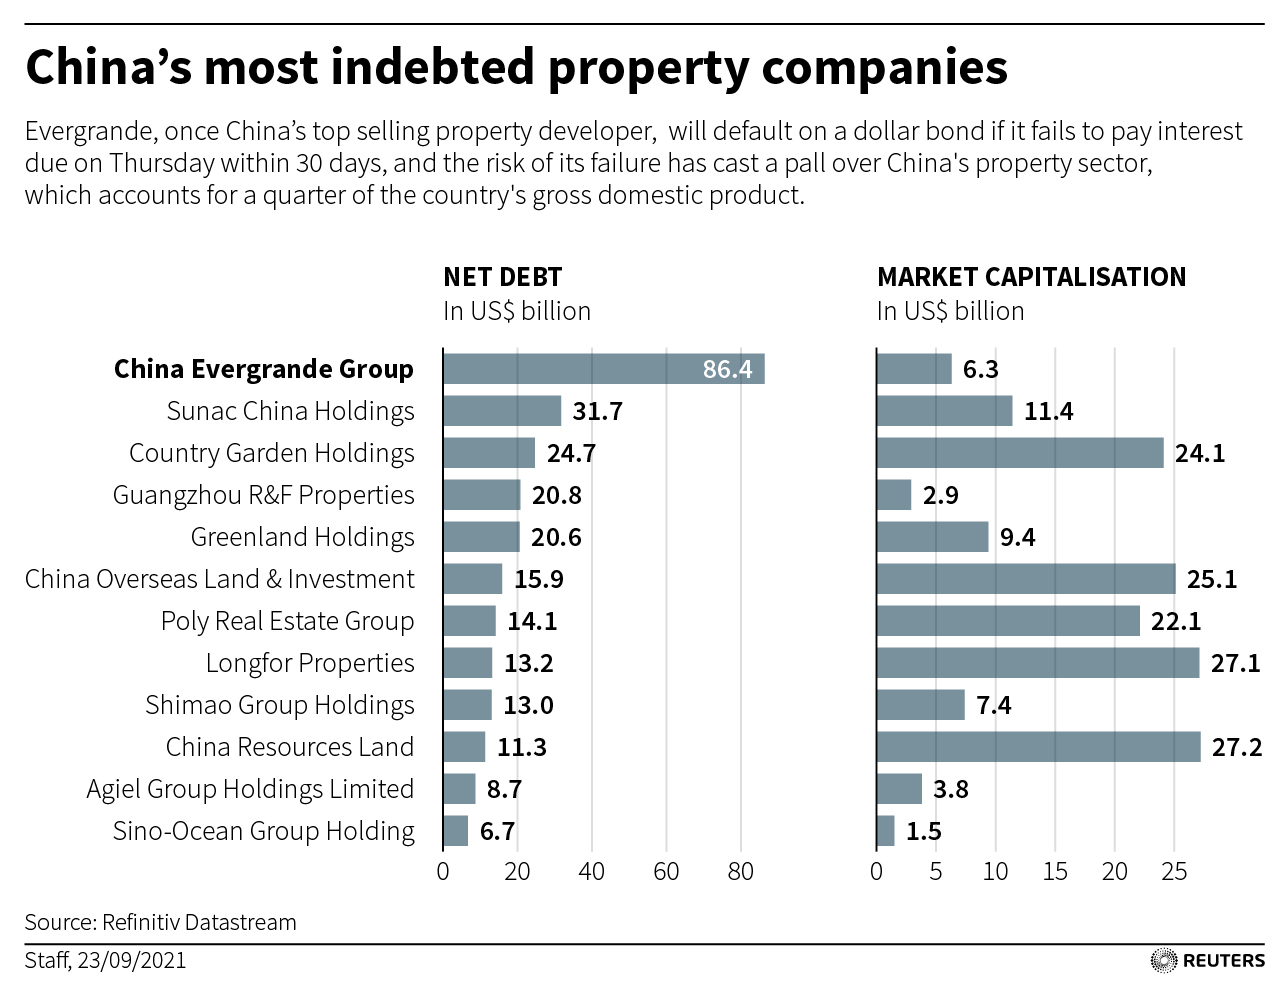 China’s most indebted property companies